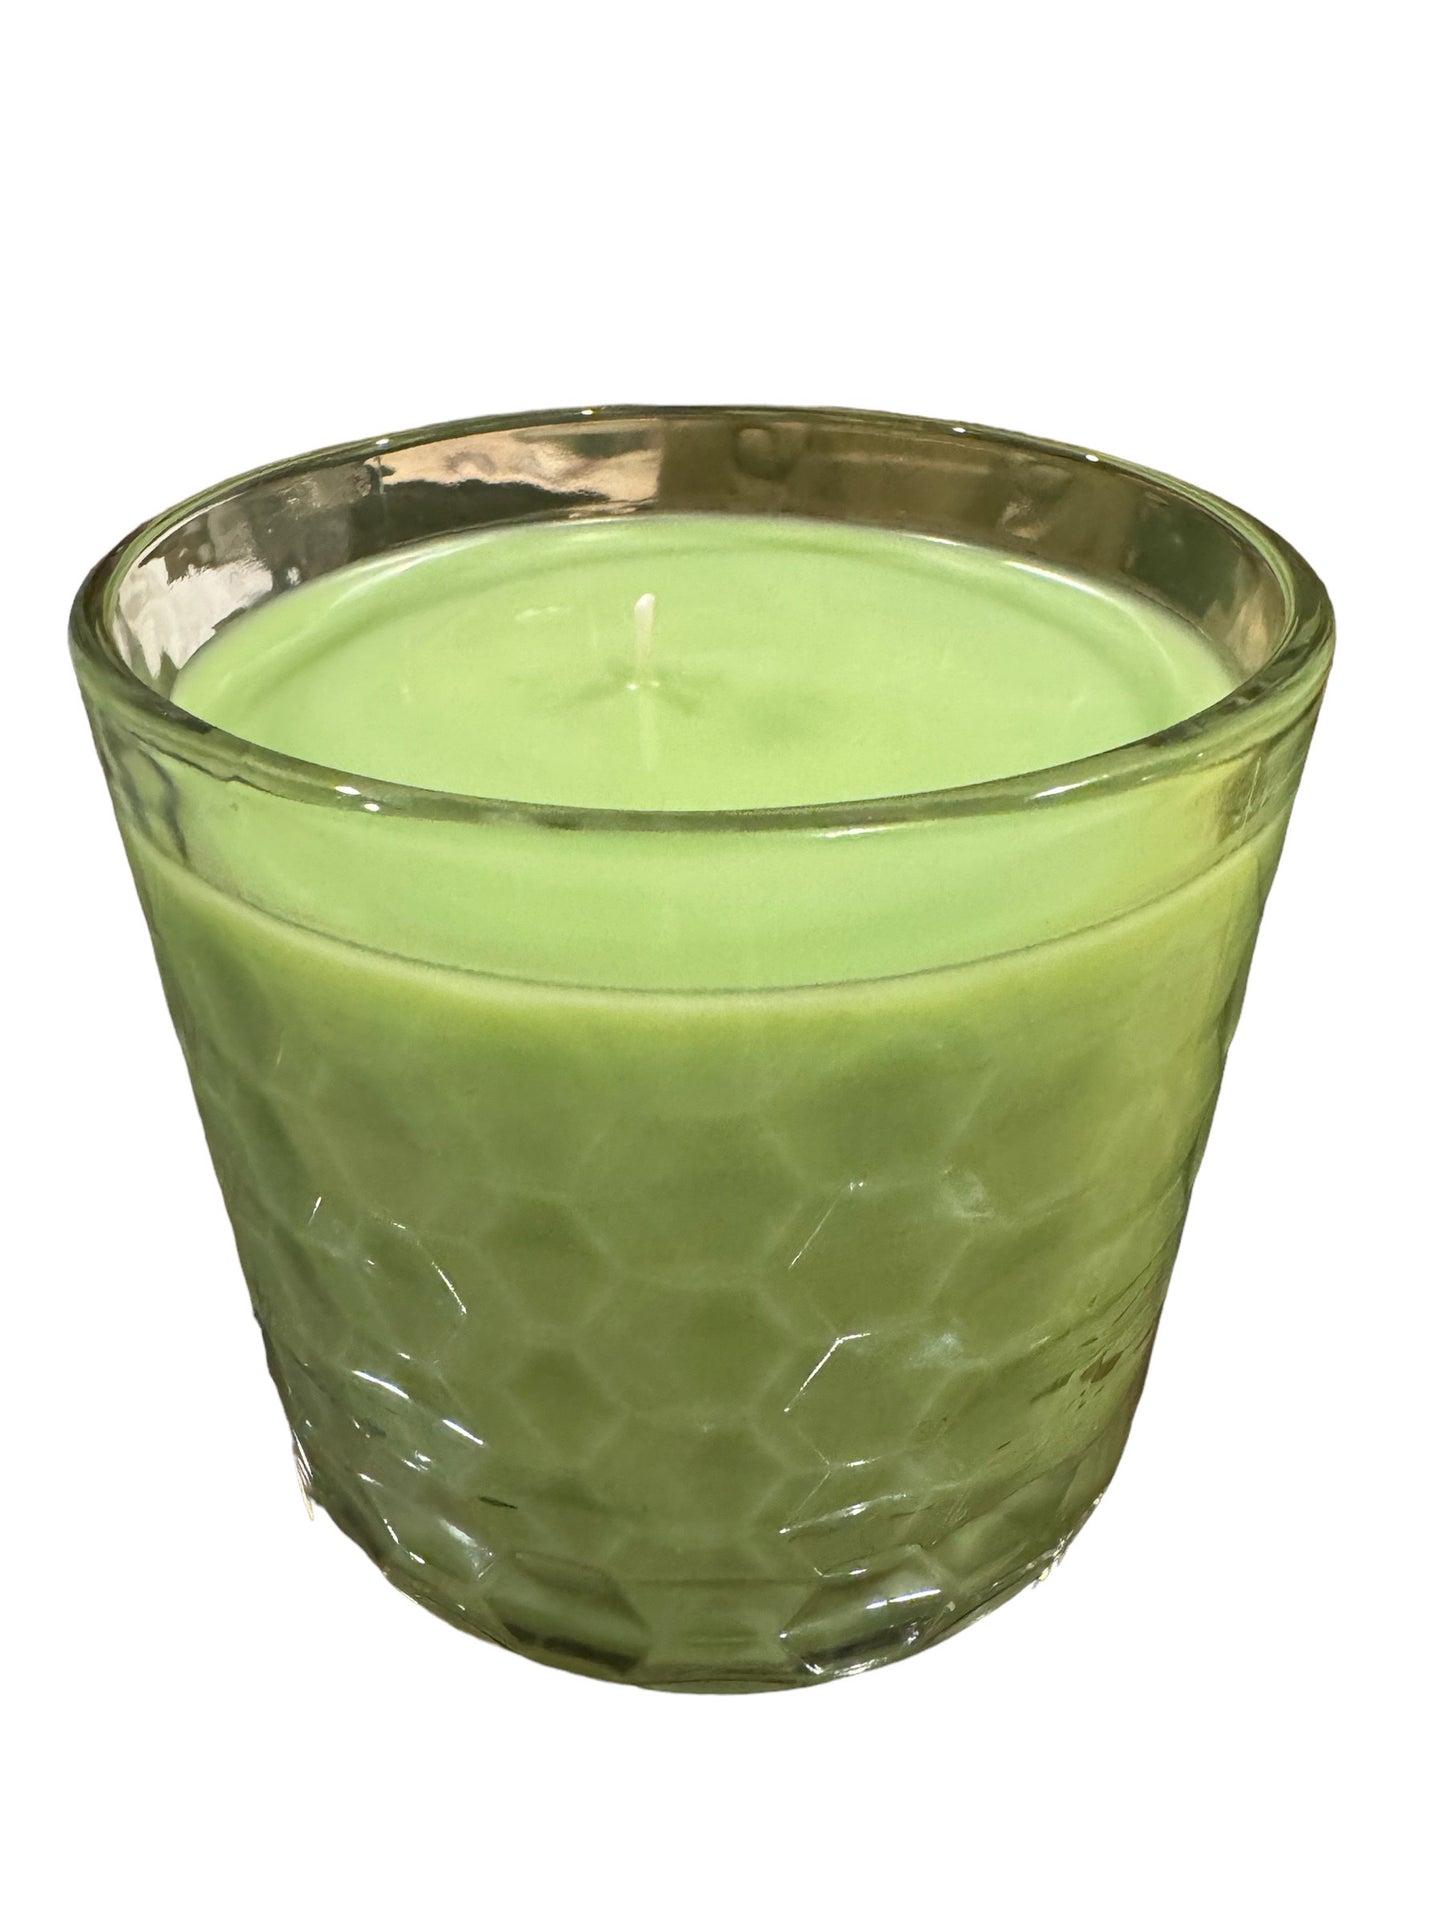 Ocean Tropical 18.2 Ounce Homemade Soy Candle in Beveled Crystal Holder